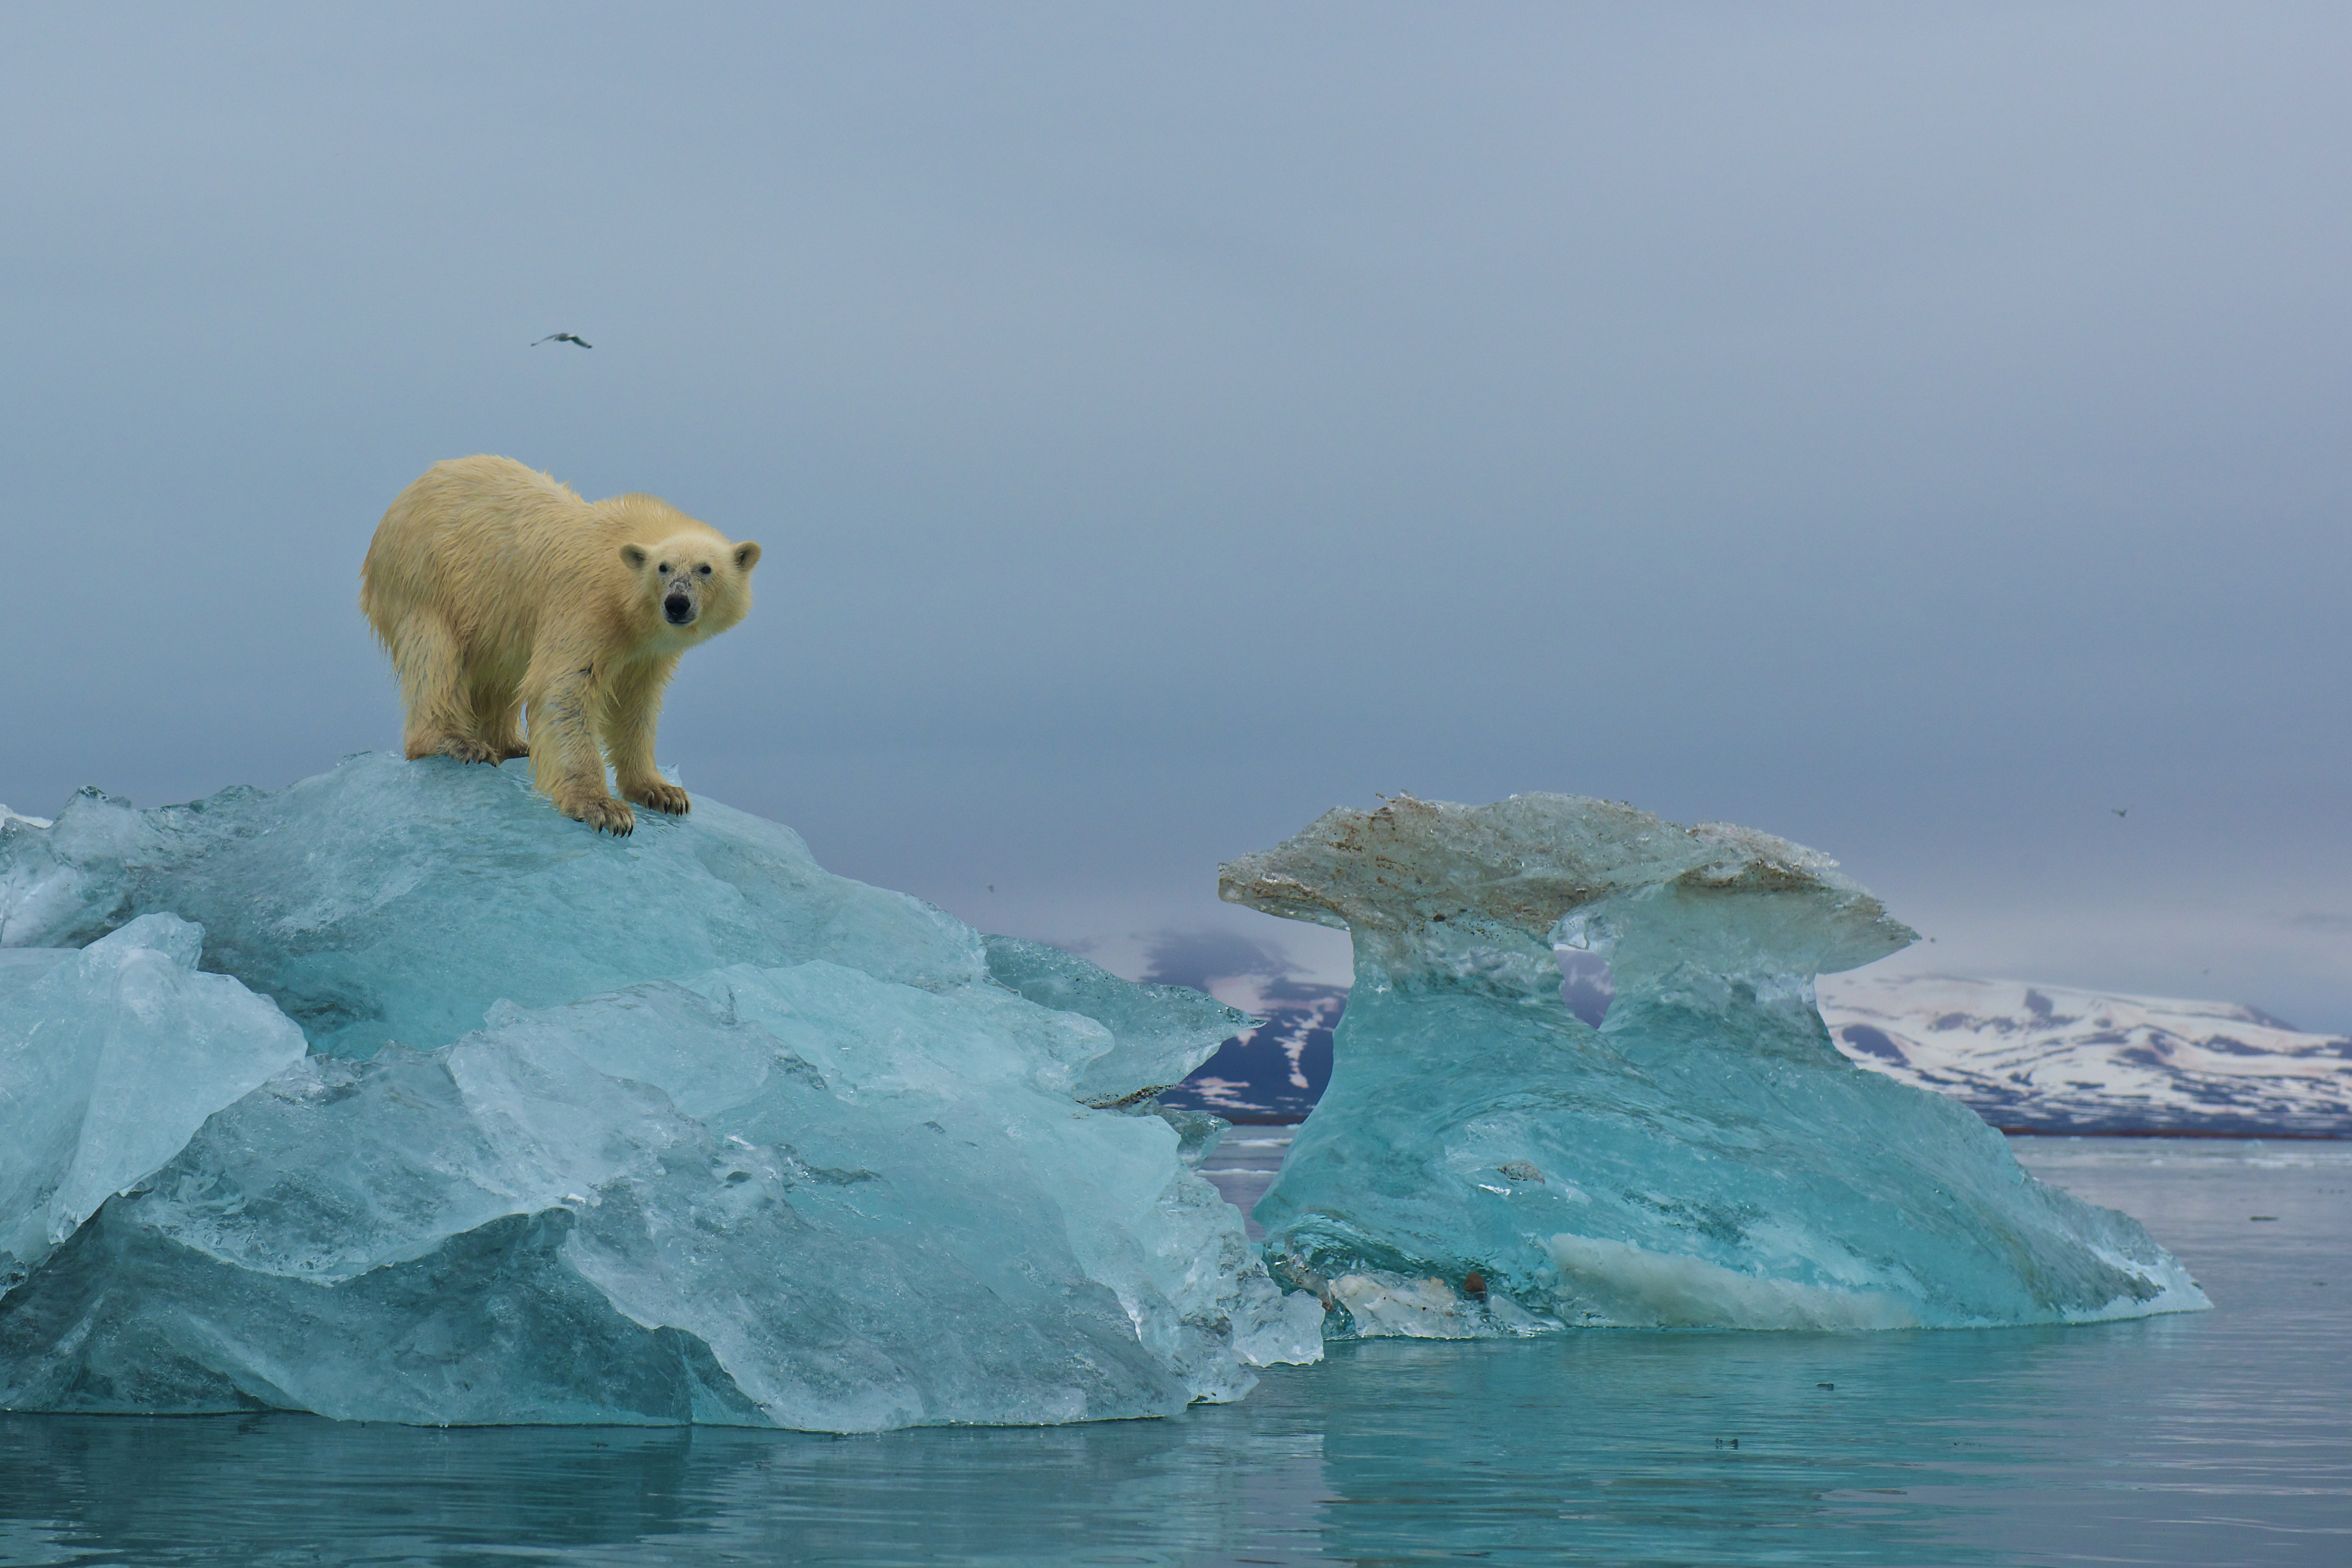 A polar bear scans the area from the top of a large piece of glacial ice in Svalbard, Norway (Rebecca Jackrel—Barcroft Media/Getty Images)